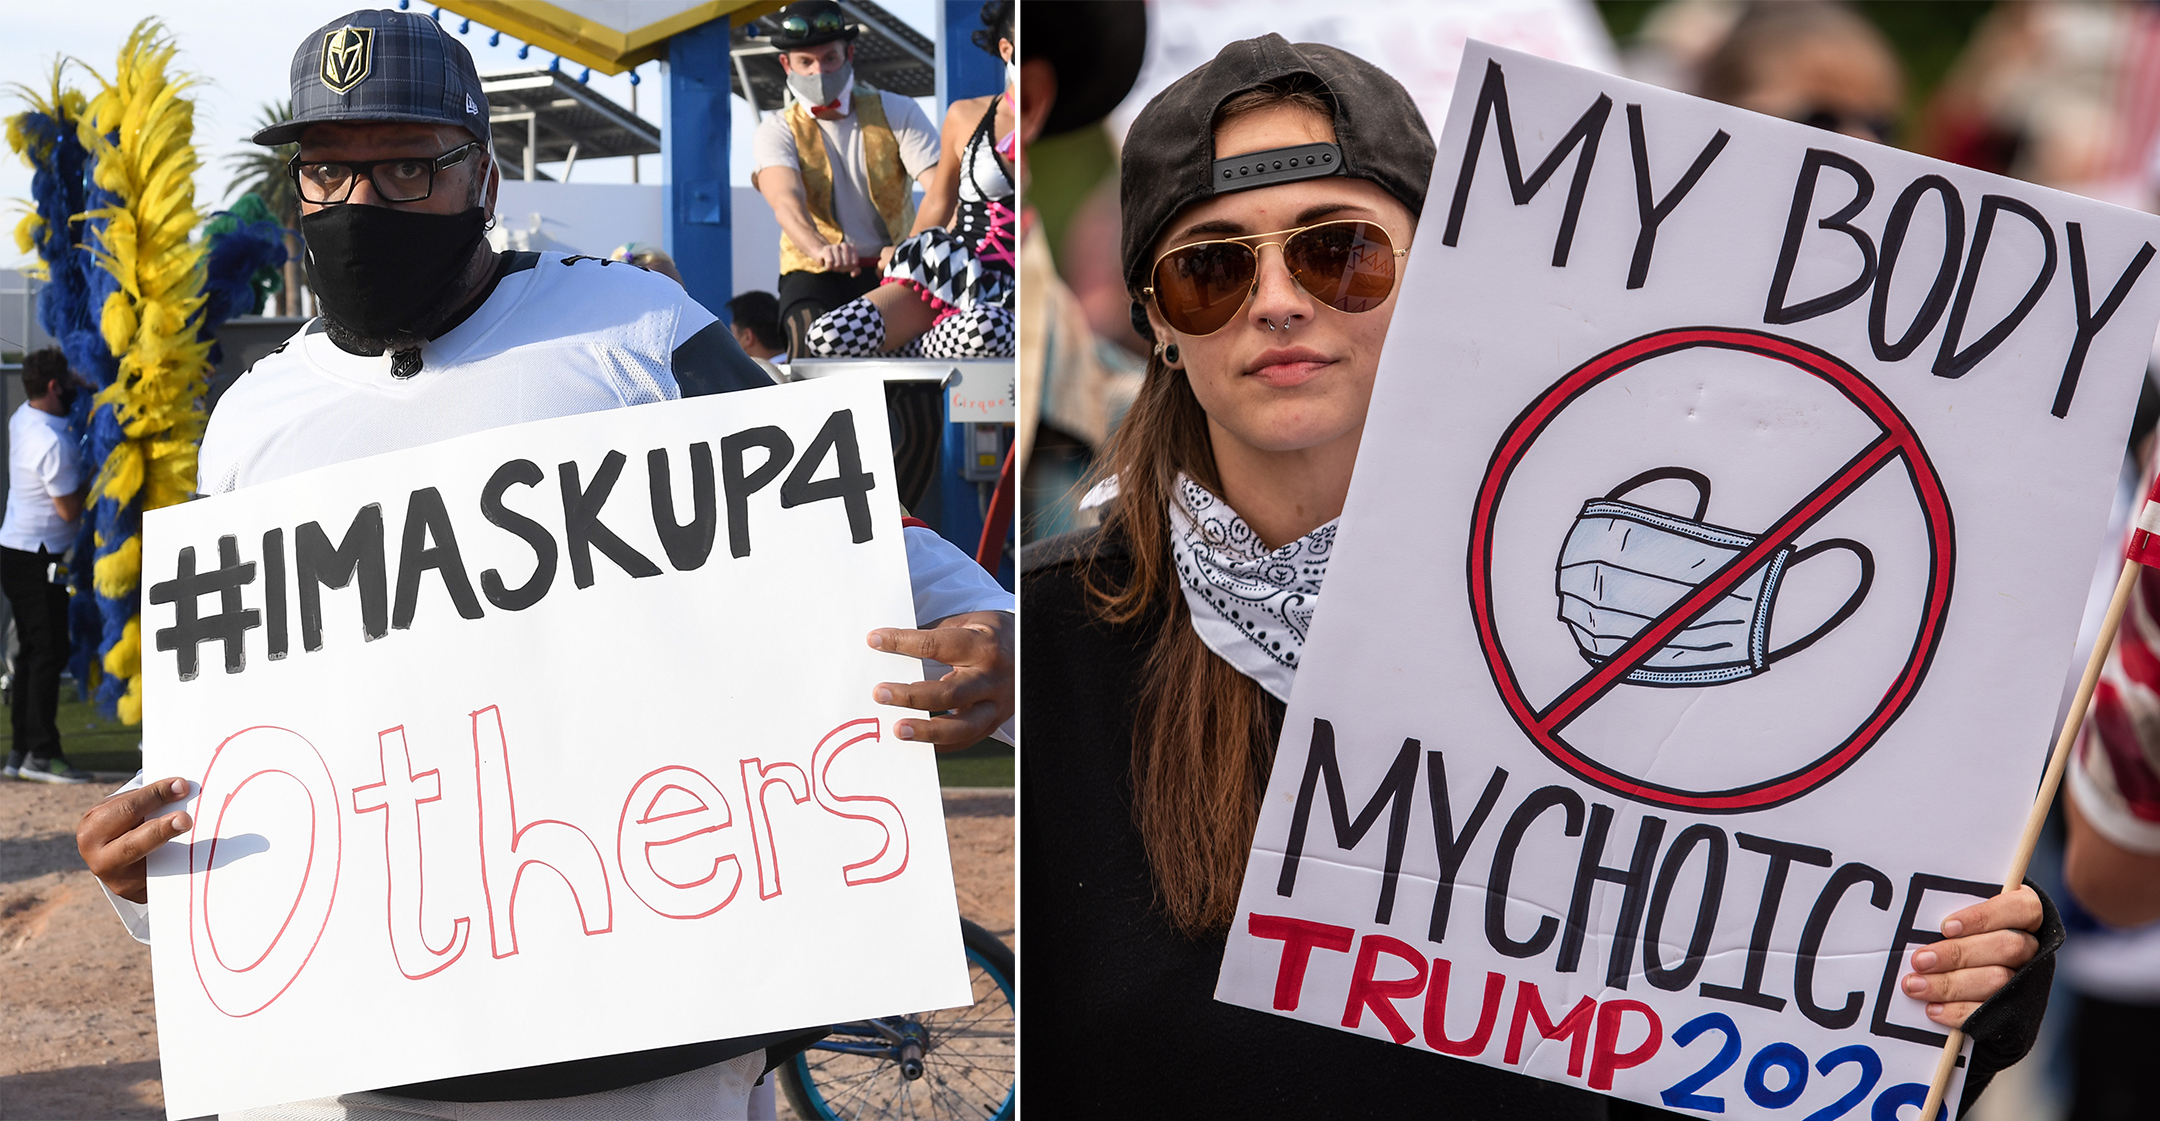 Two photos side by side, on the left a black man holding up a sign that reads #IMASKUP4 Others, and on the right a white woman holding up a sign that reads MY BODY MY CHOICE TRUMP 2020 with a drawing of a crossed out mask in the middle